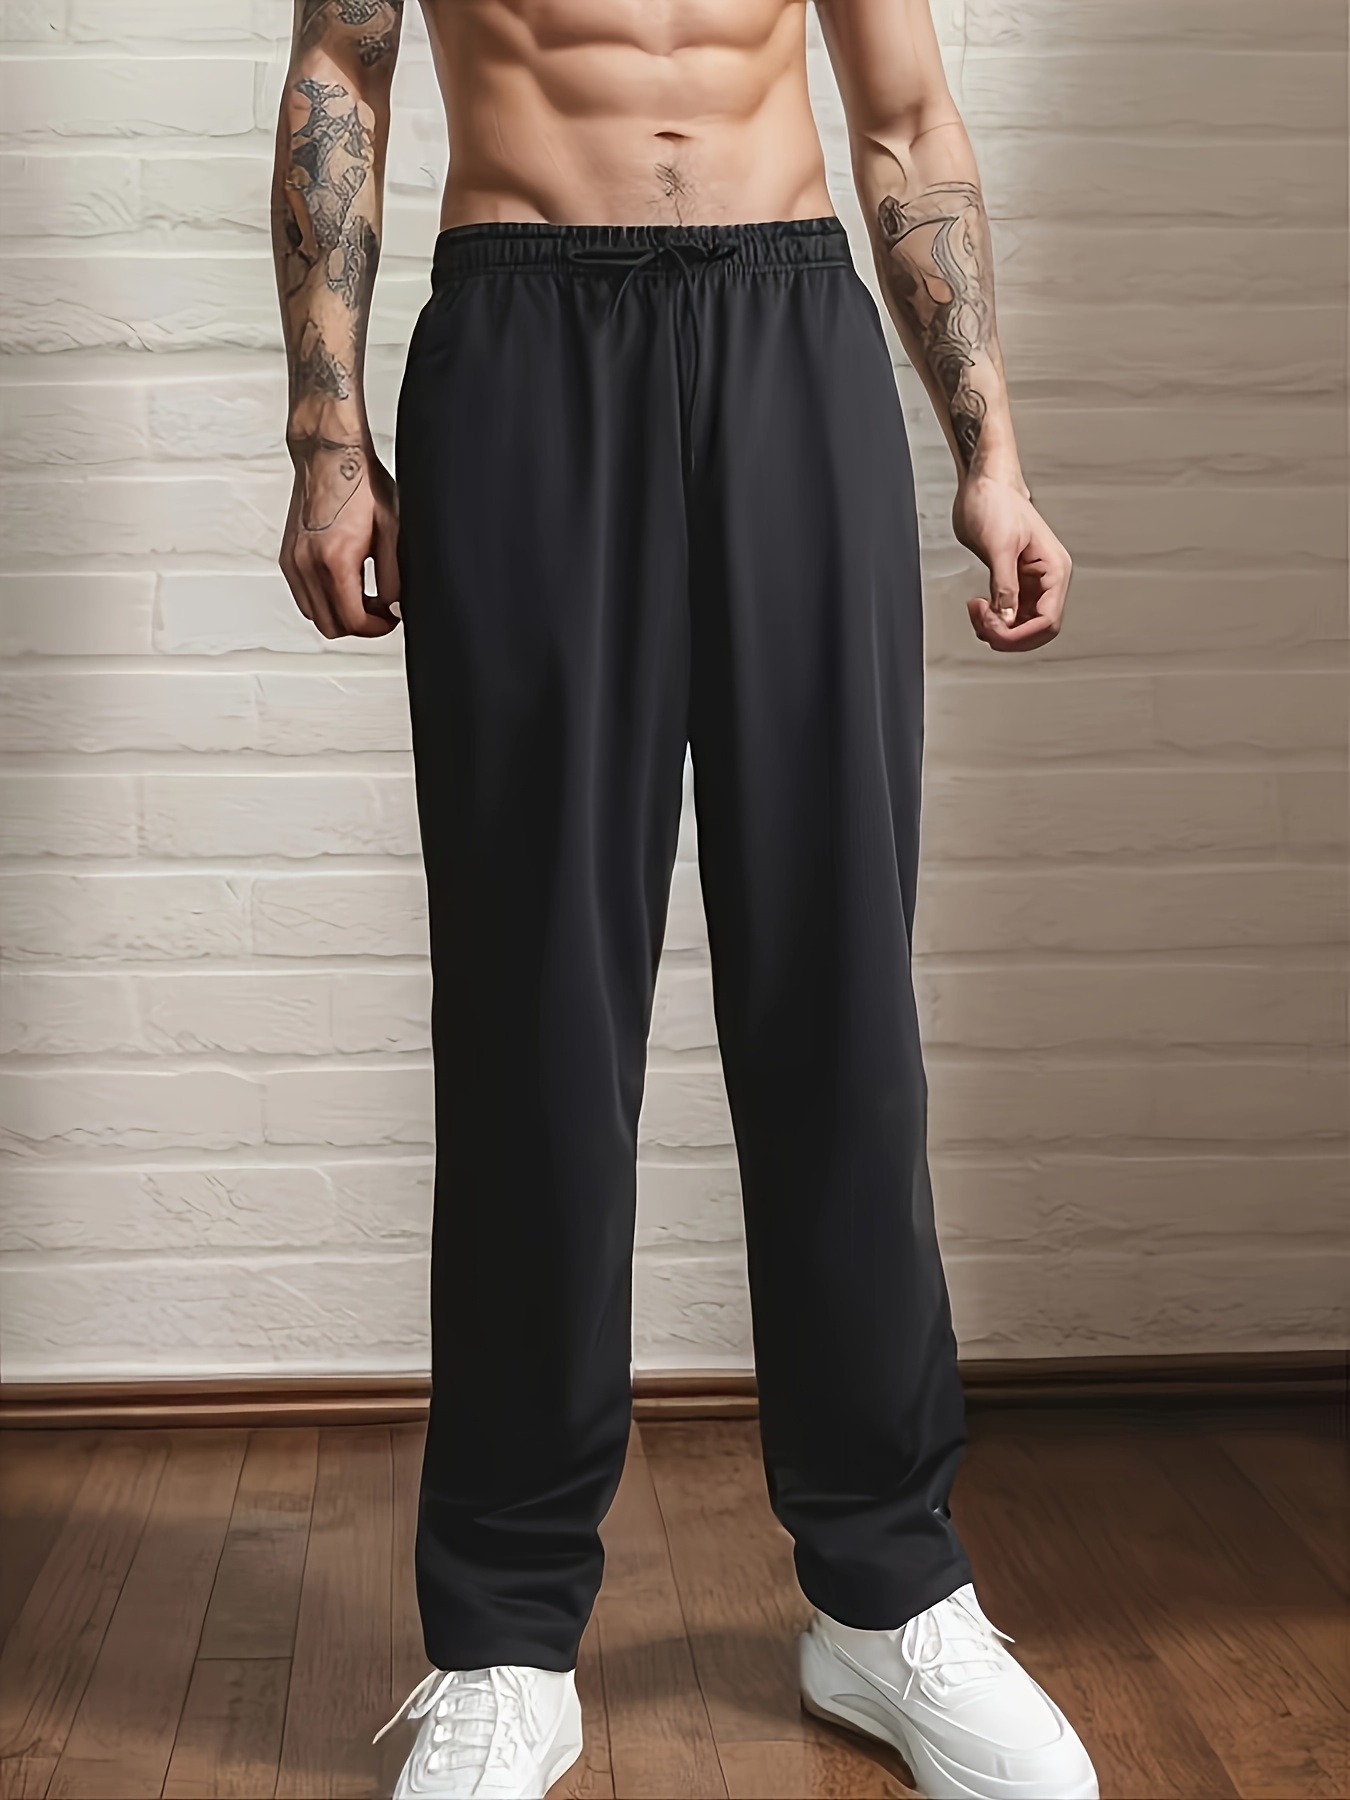 Men's Fashionable Drawstring Casual Sports Loose Pants Trousers, Suitable For Outdoor Sports, Comfortable And Versatile